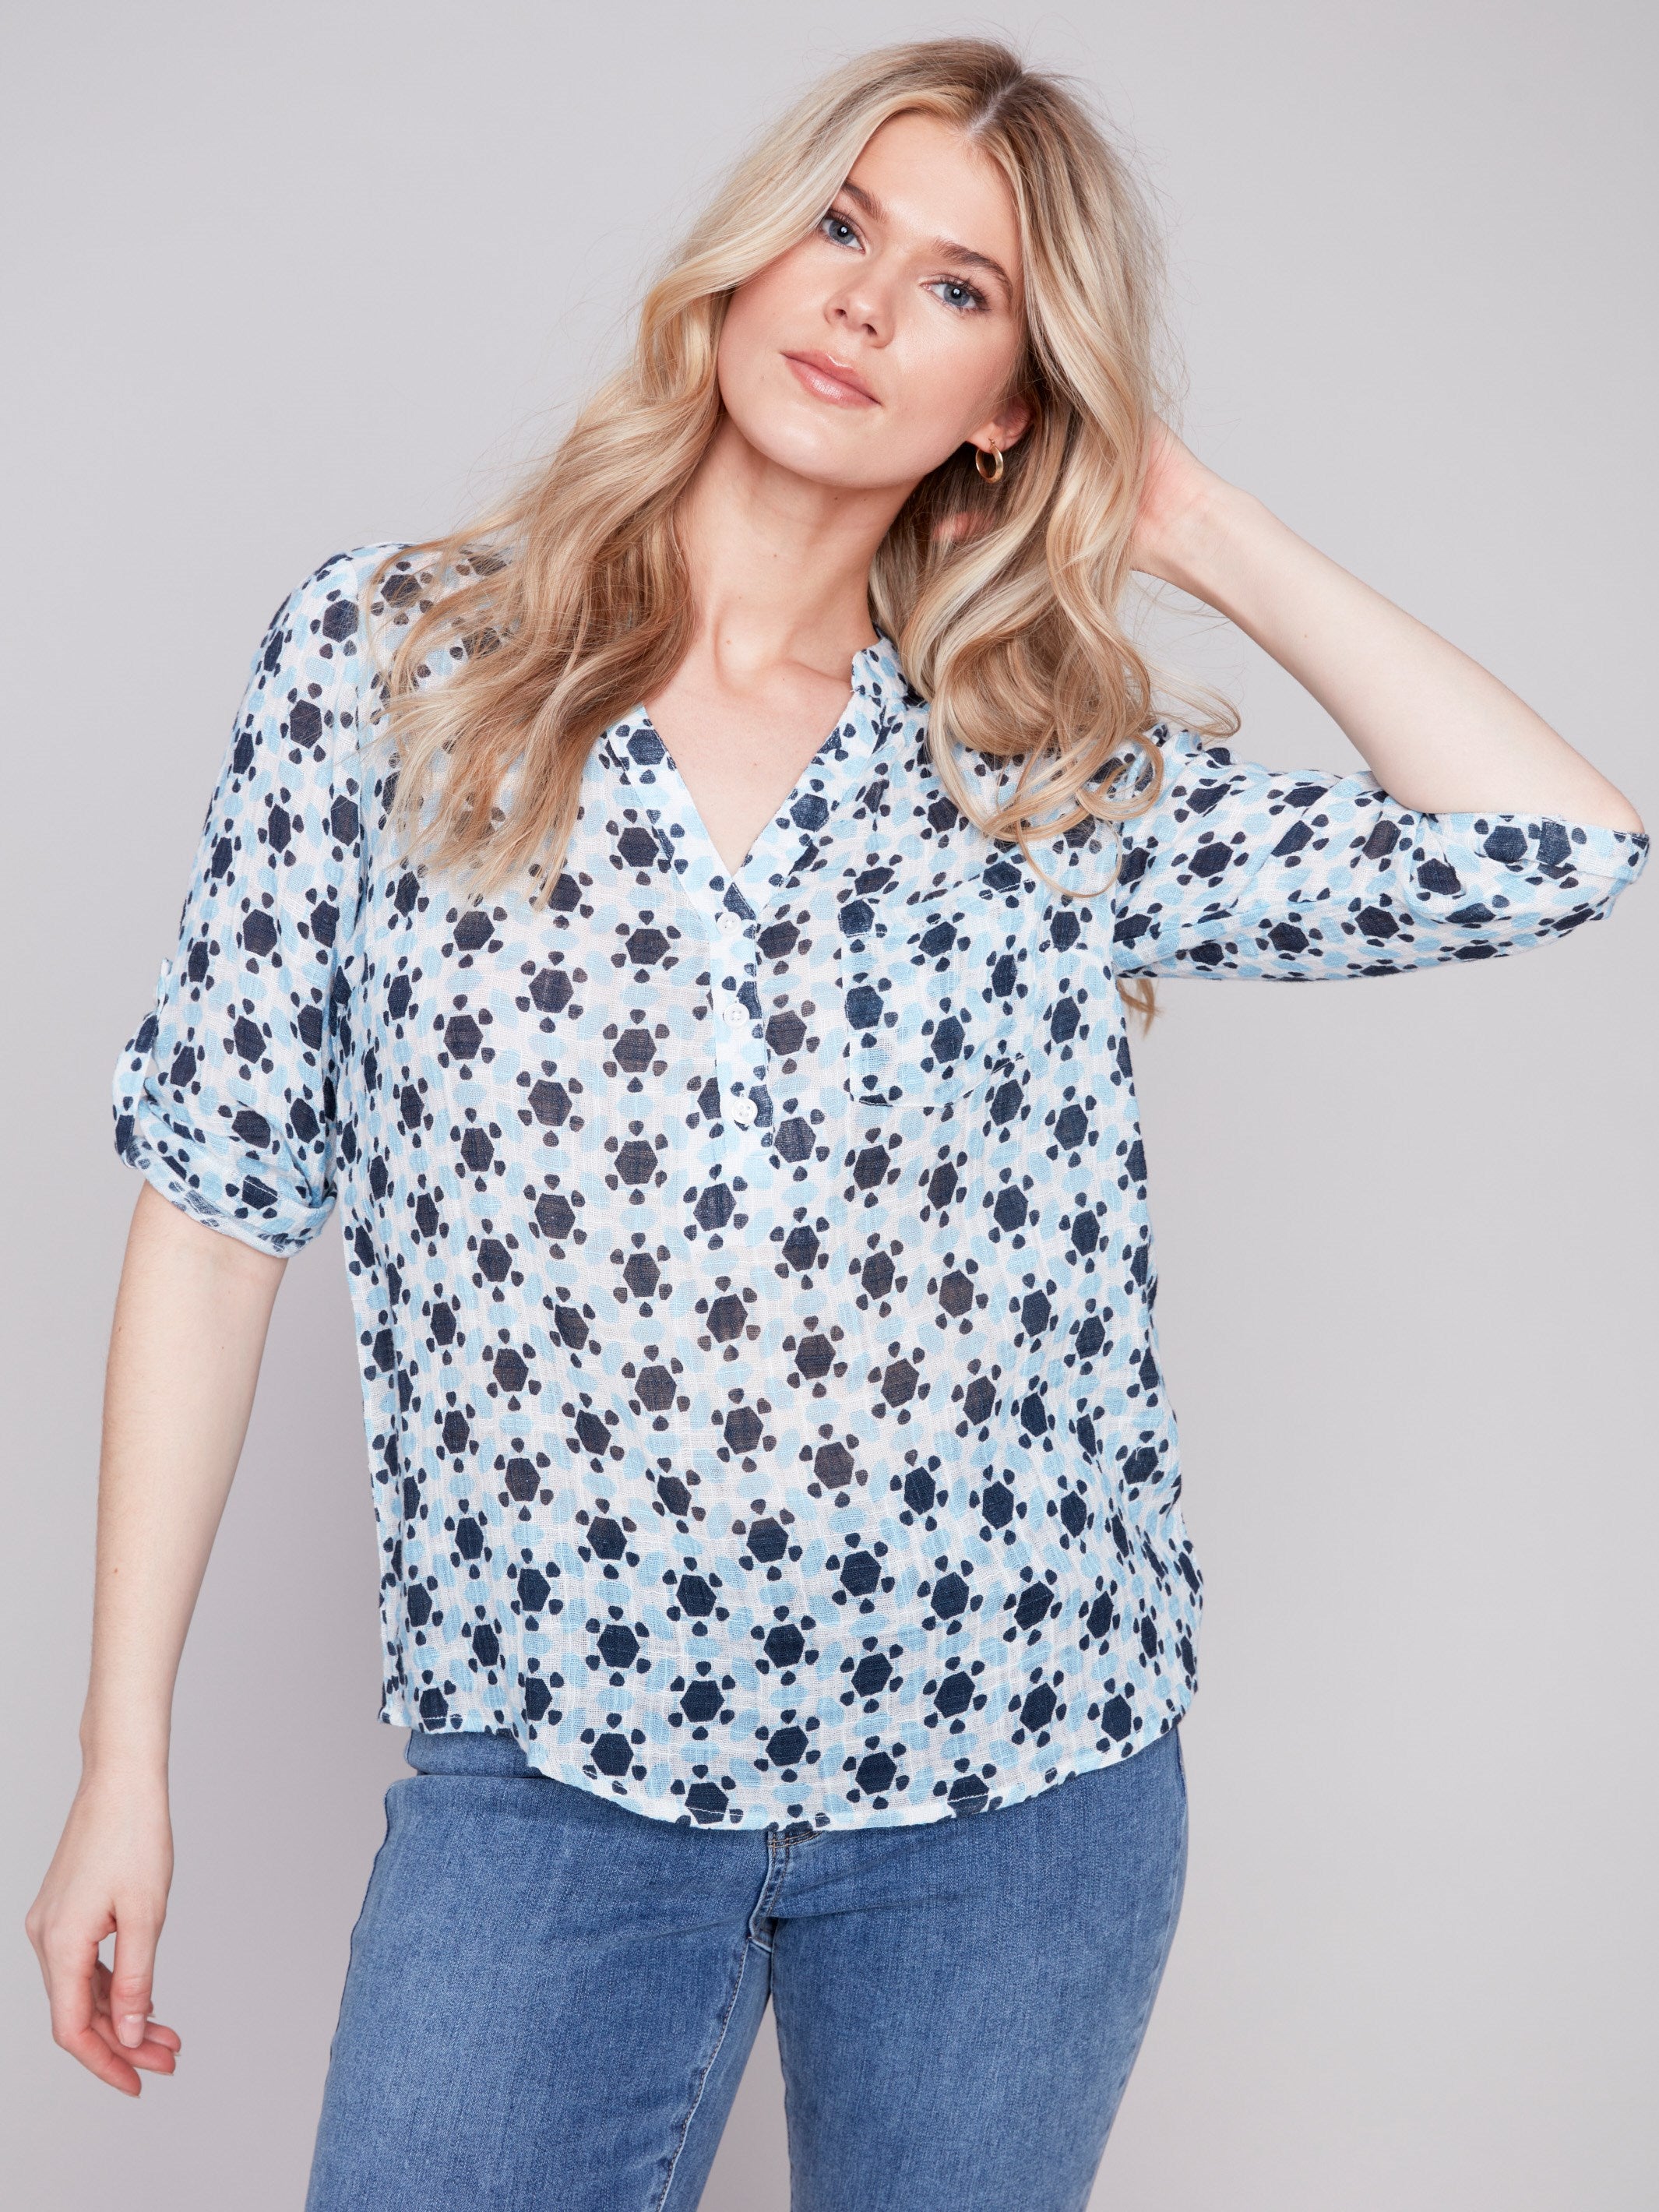 Printed Cotton Gauze Blouse - Geo - Charlie B Collection Canada - Image 1